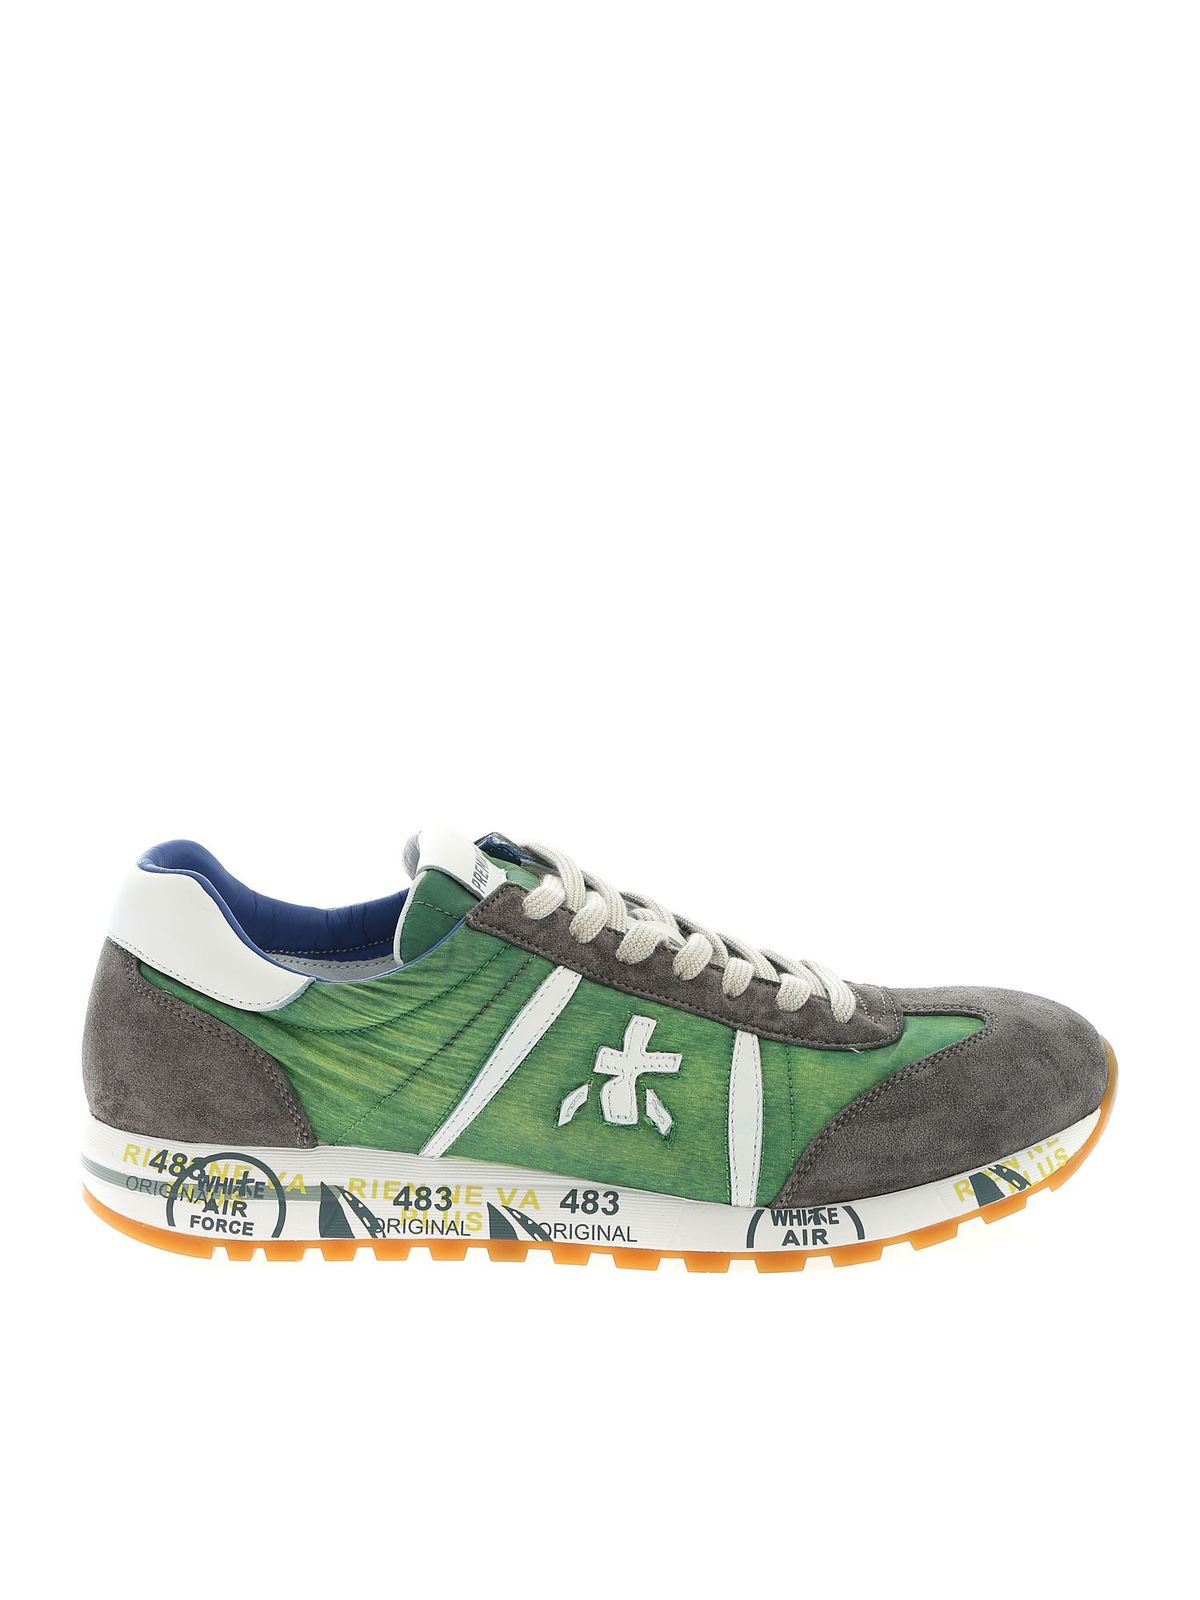 Premiata - Lucy sneakers in green and 